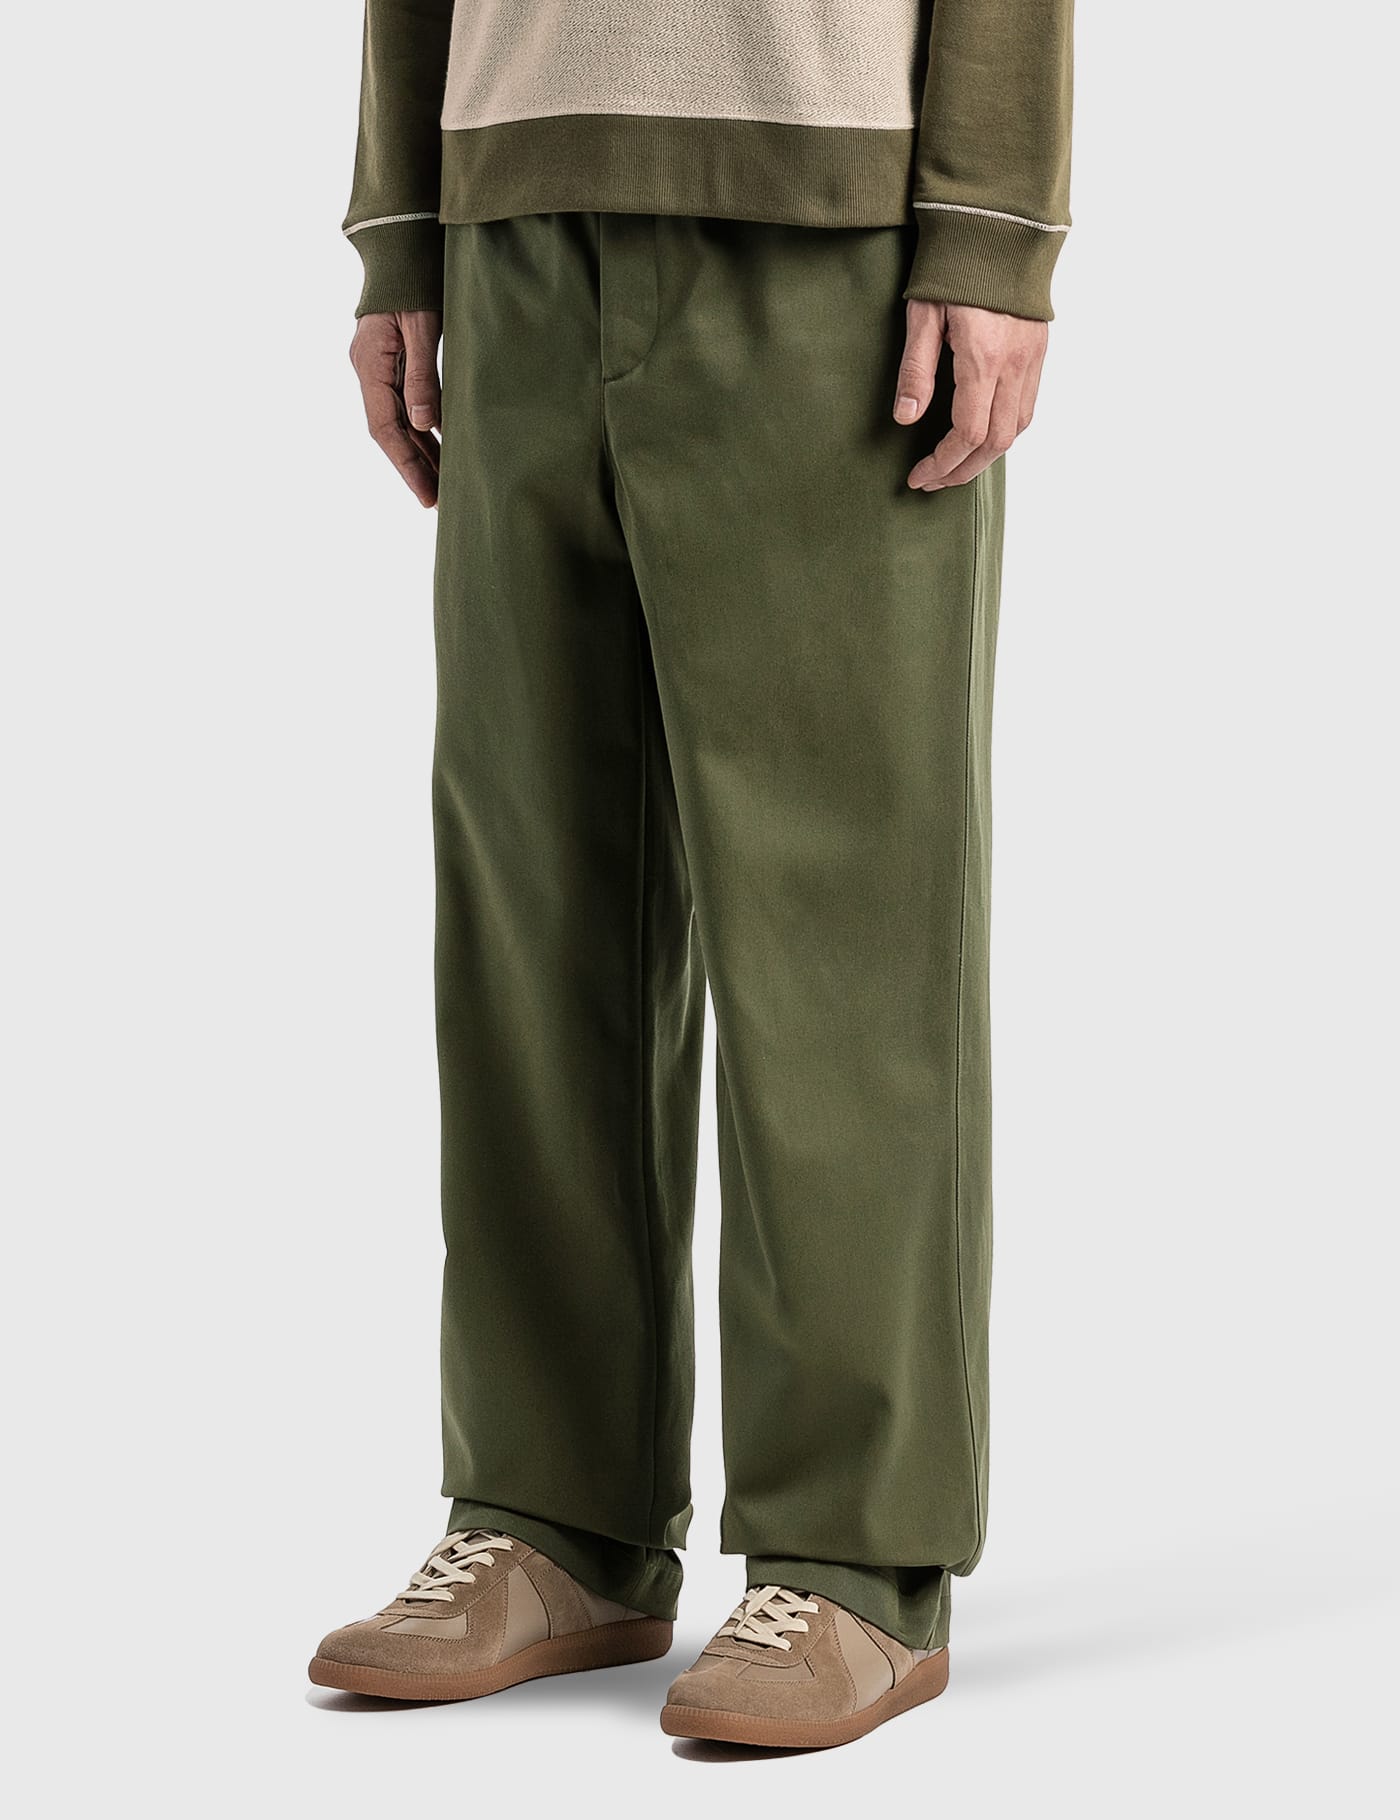 Loewe - Drawstring Trousers | HBX - Globally Curated Fashion and 